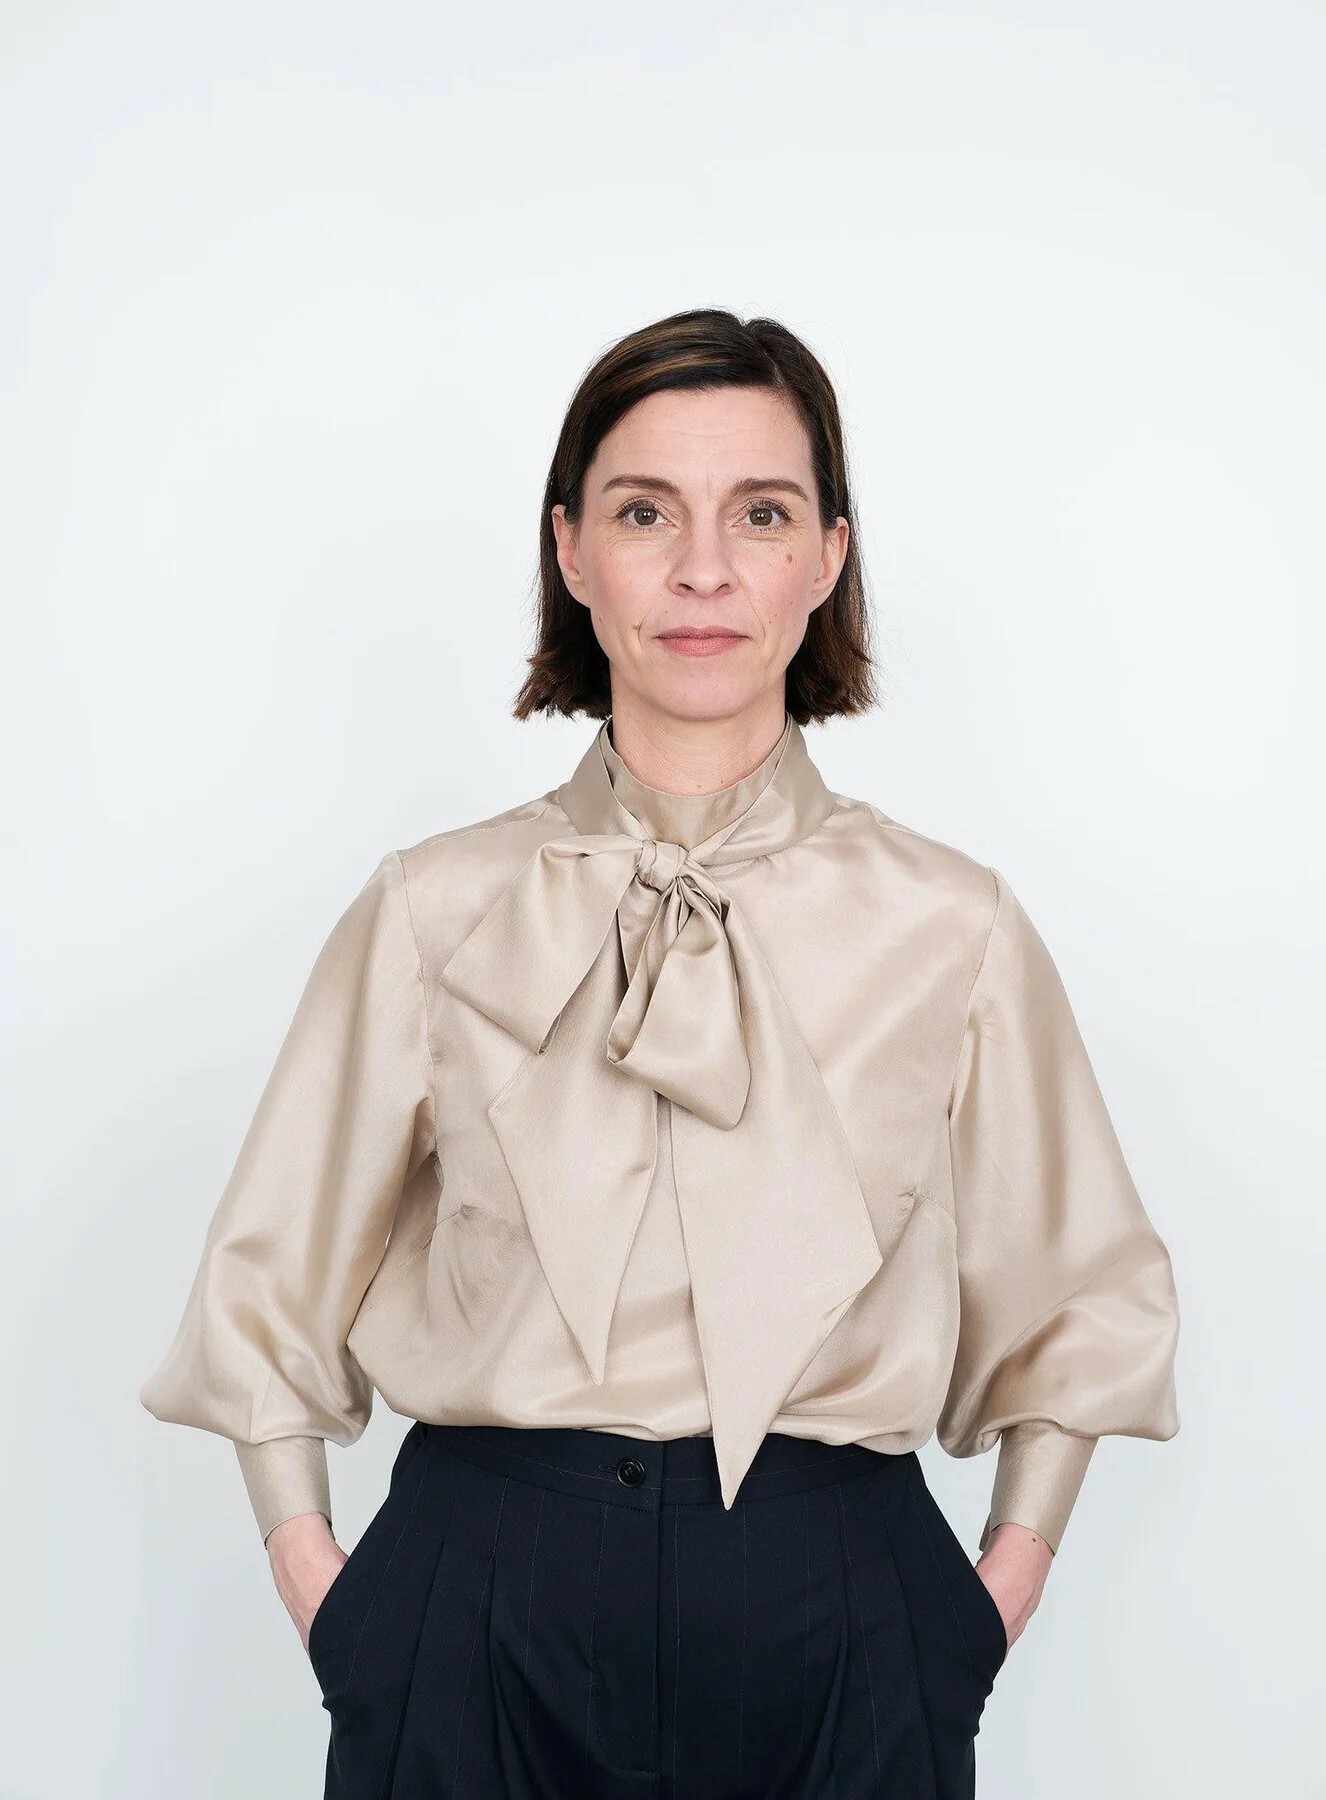 Buy The Assembly Line Tie Bow Blouse Sewing Pattern